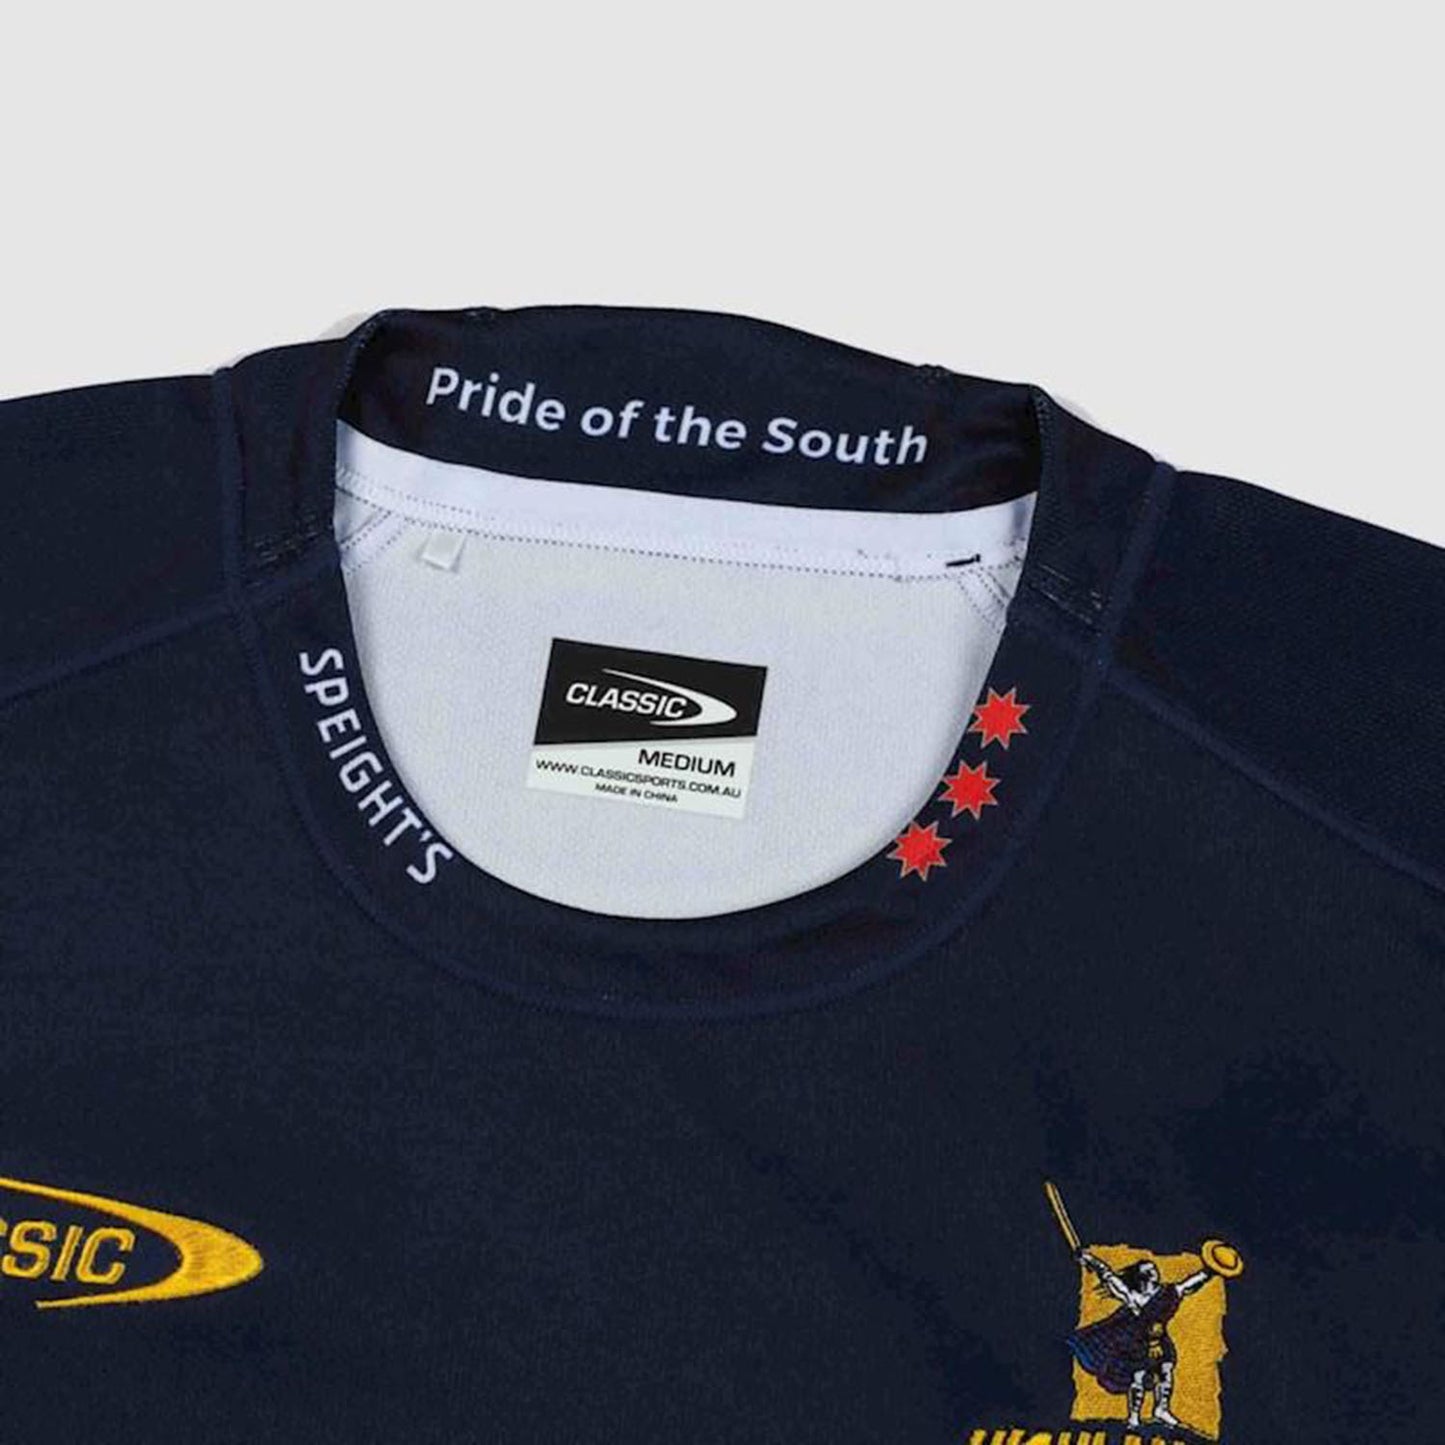 Highlanders Youth Replica Jersey Home